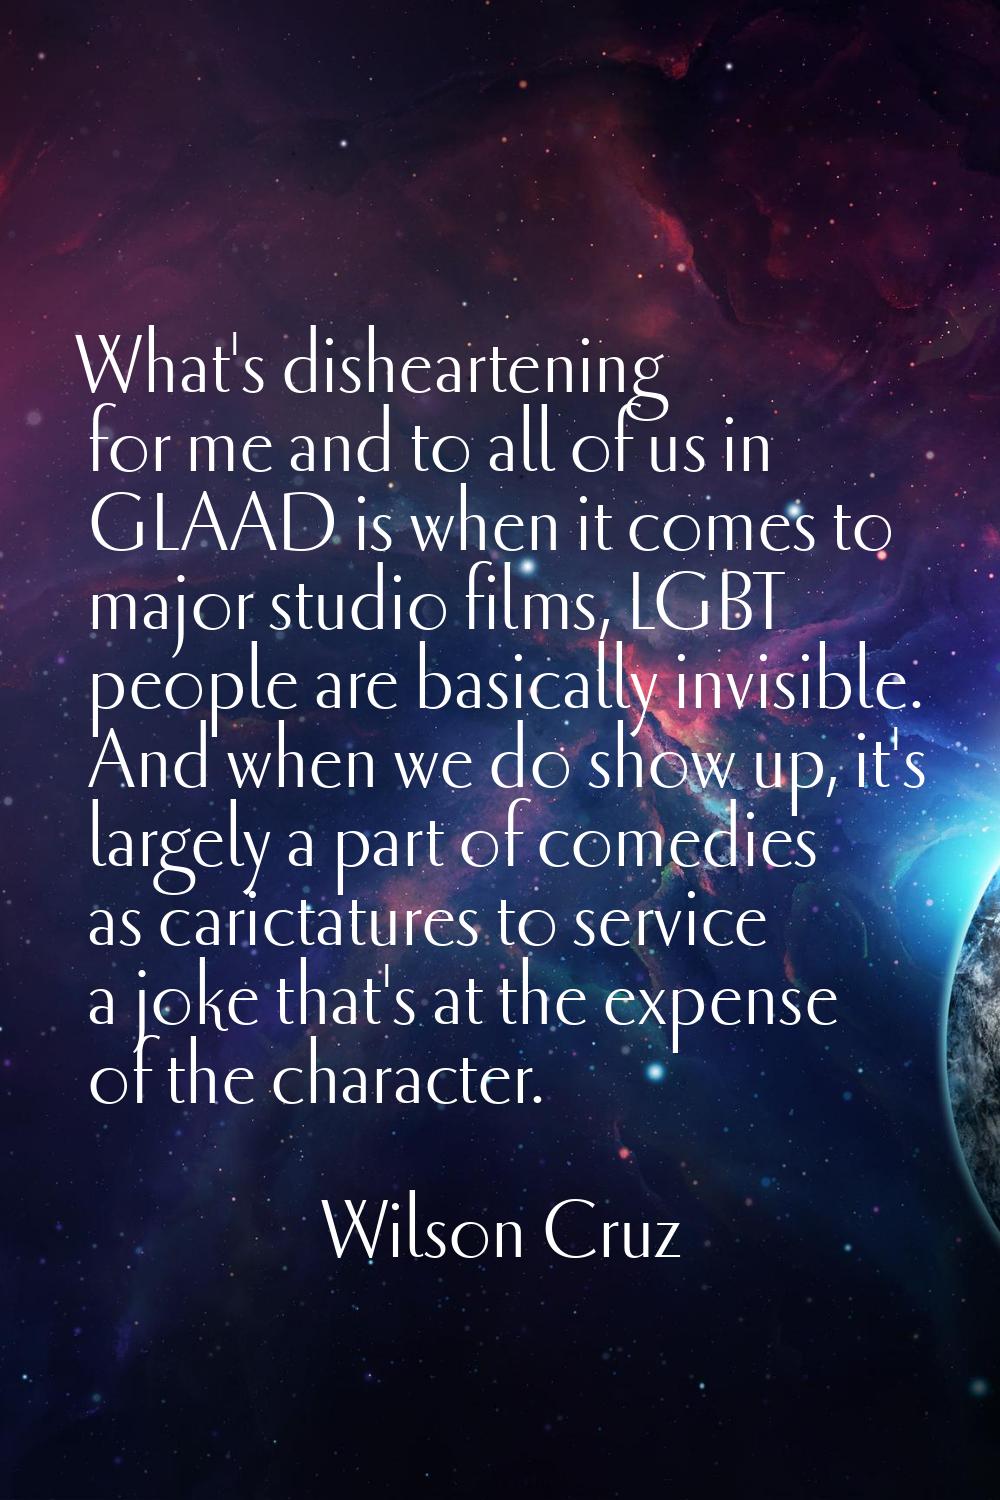 What's disheartening for me and to all of us in GLAAD is when it comes to major studio films, LGBT 